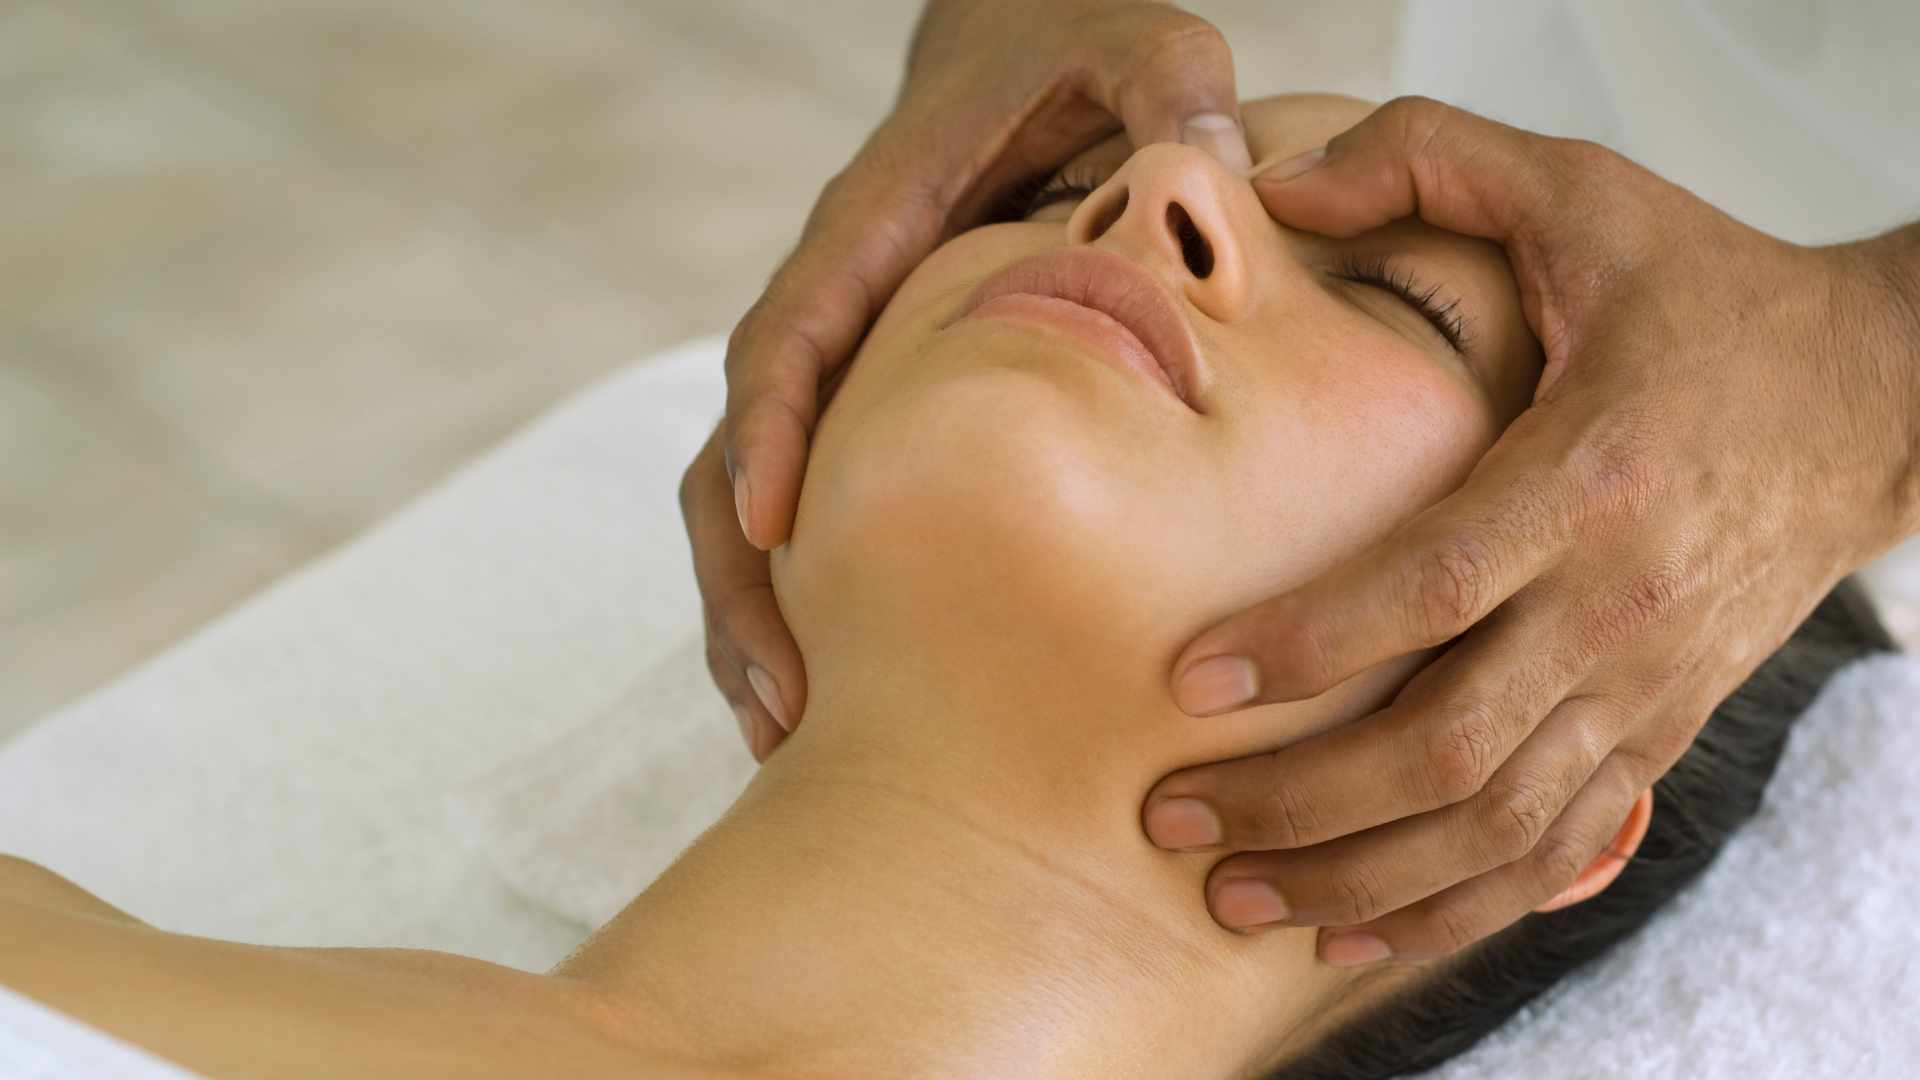 Hands on facial and relaxing massage. 